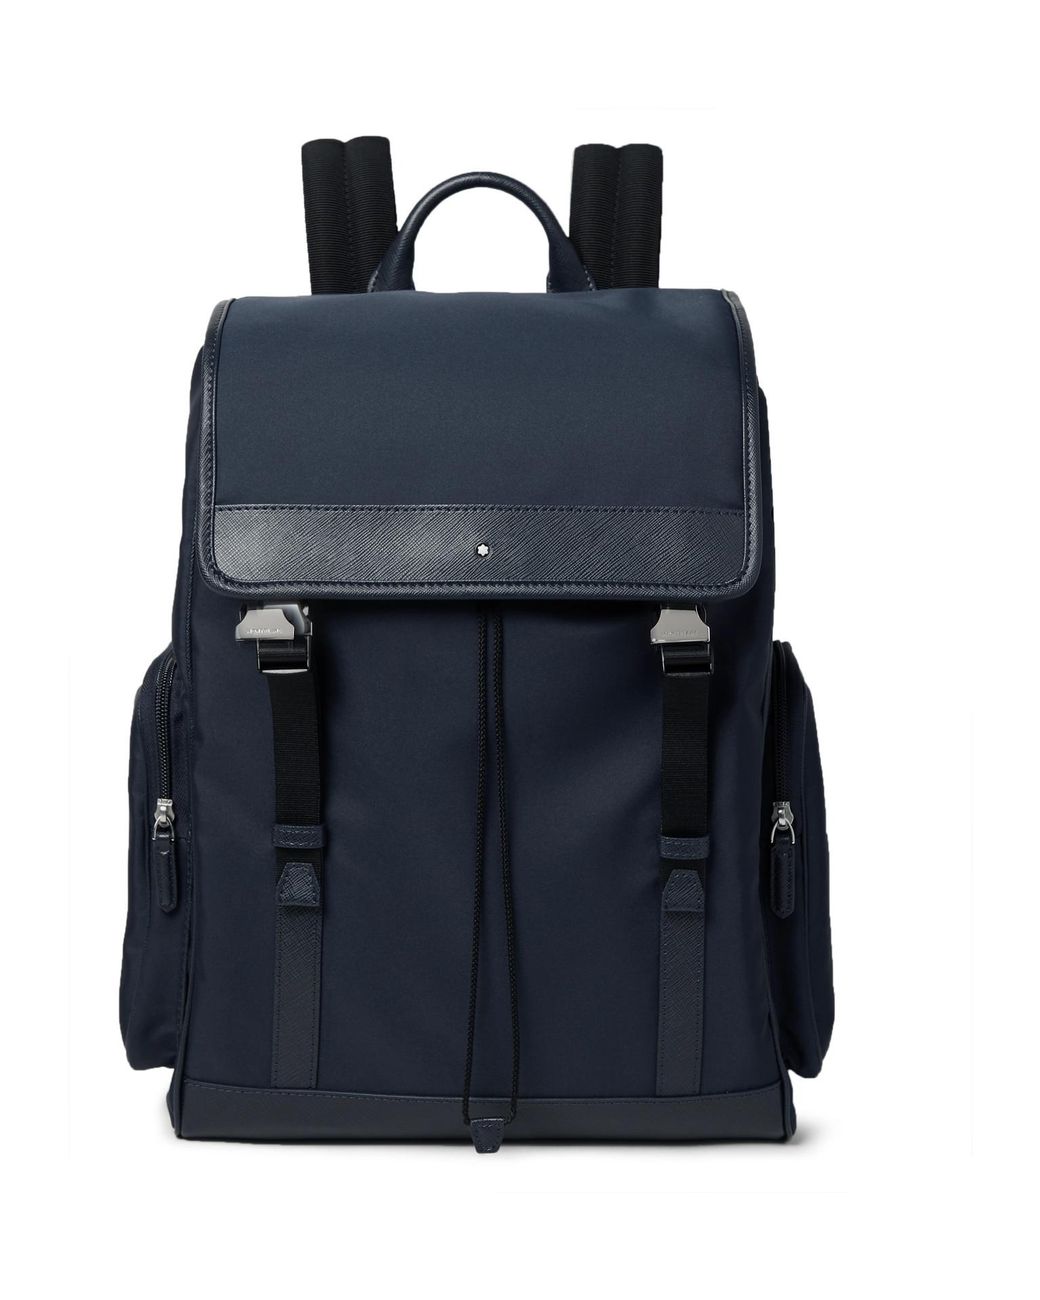 Montblanc Sartorial Jet Cross-grain Leather-trimmed Nylon Backpack in ...